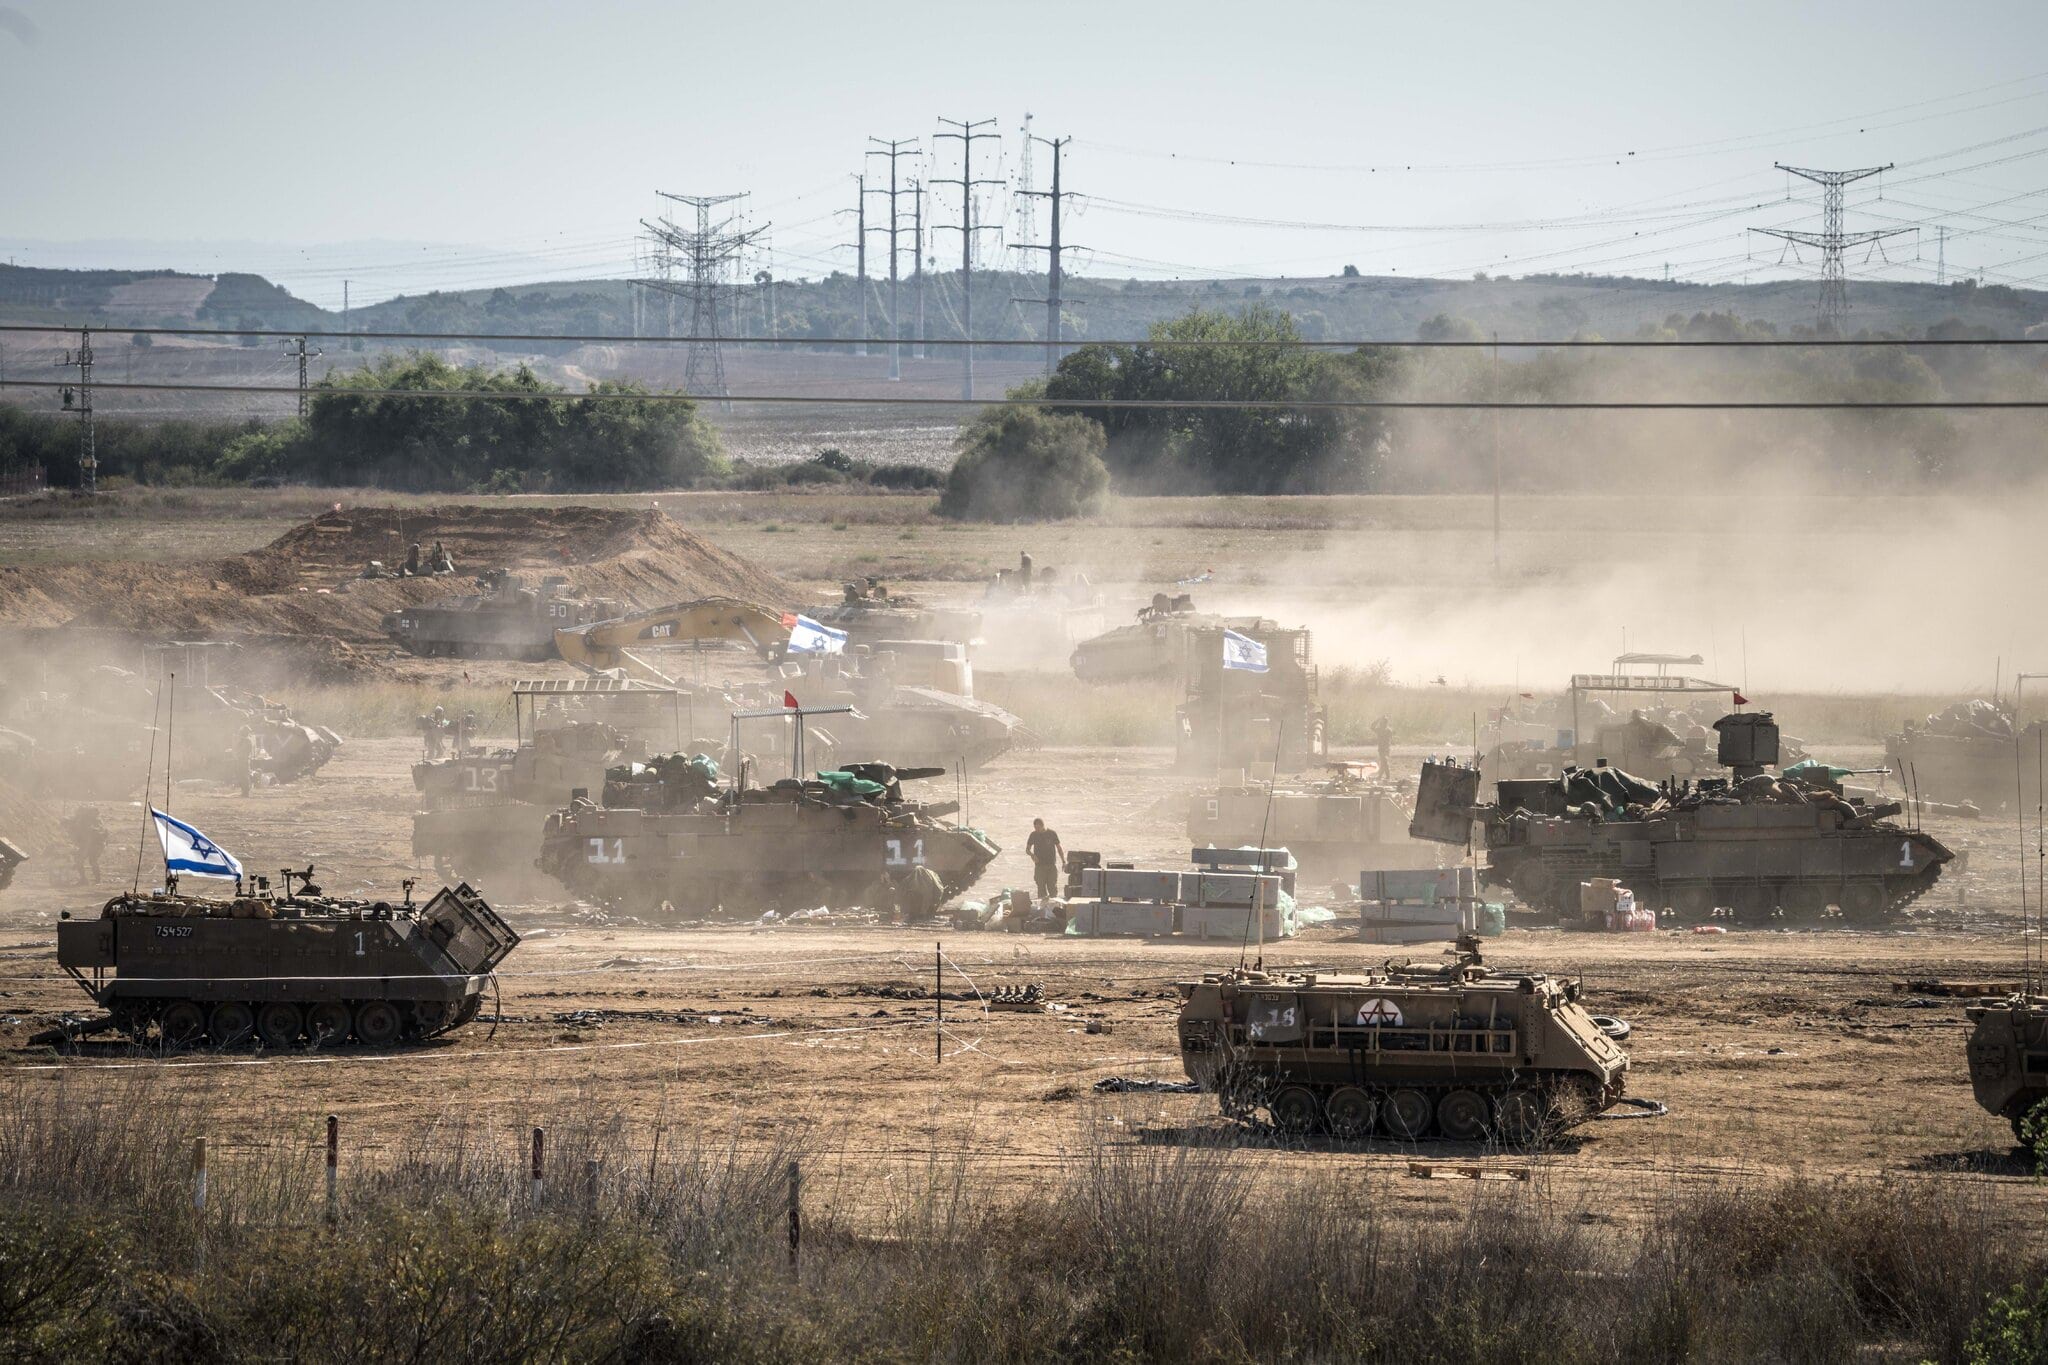 Israeli military vehicles near the Gaza Strip this week.Credit...Sergey Ponomarev for The New York Times